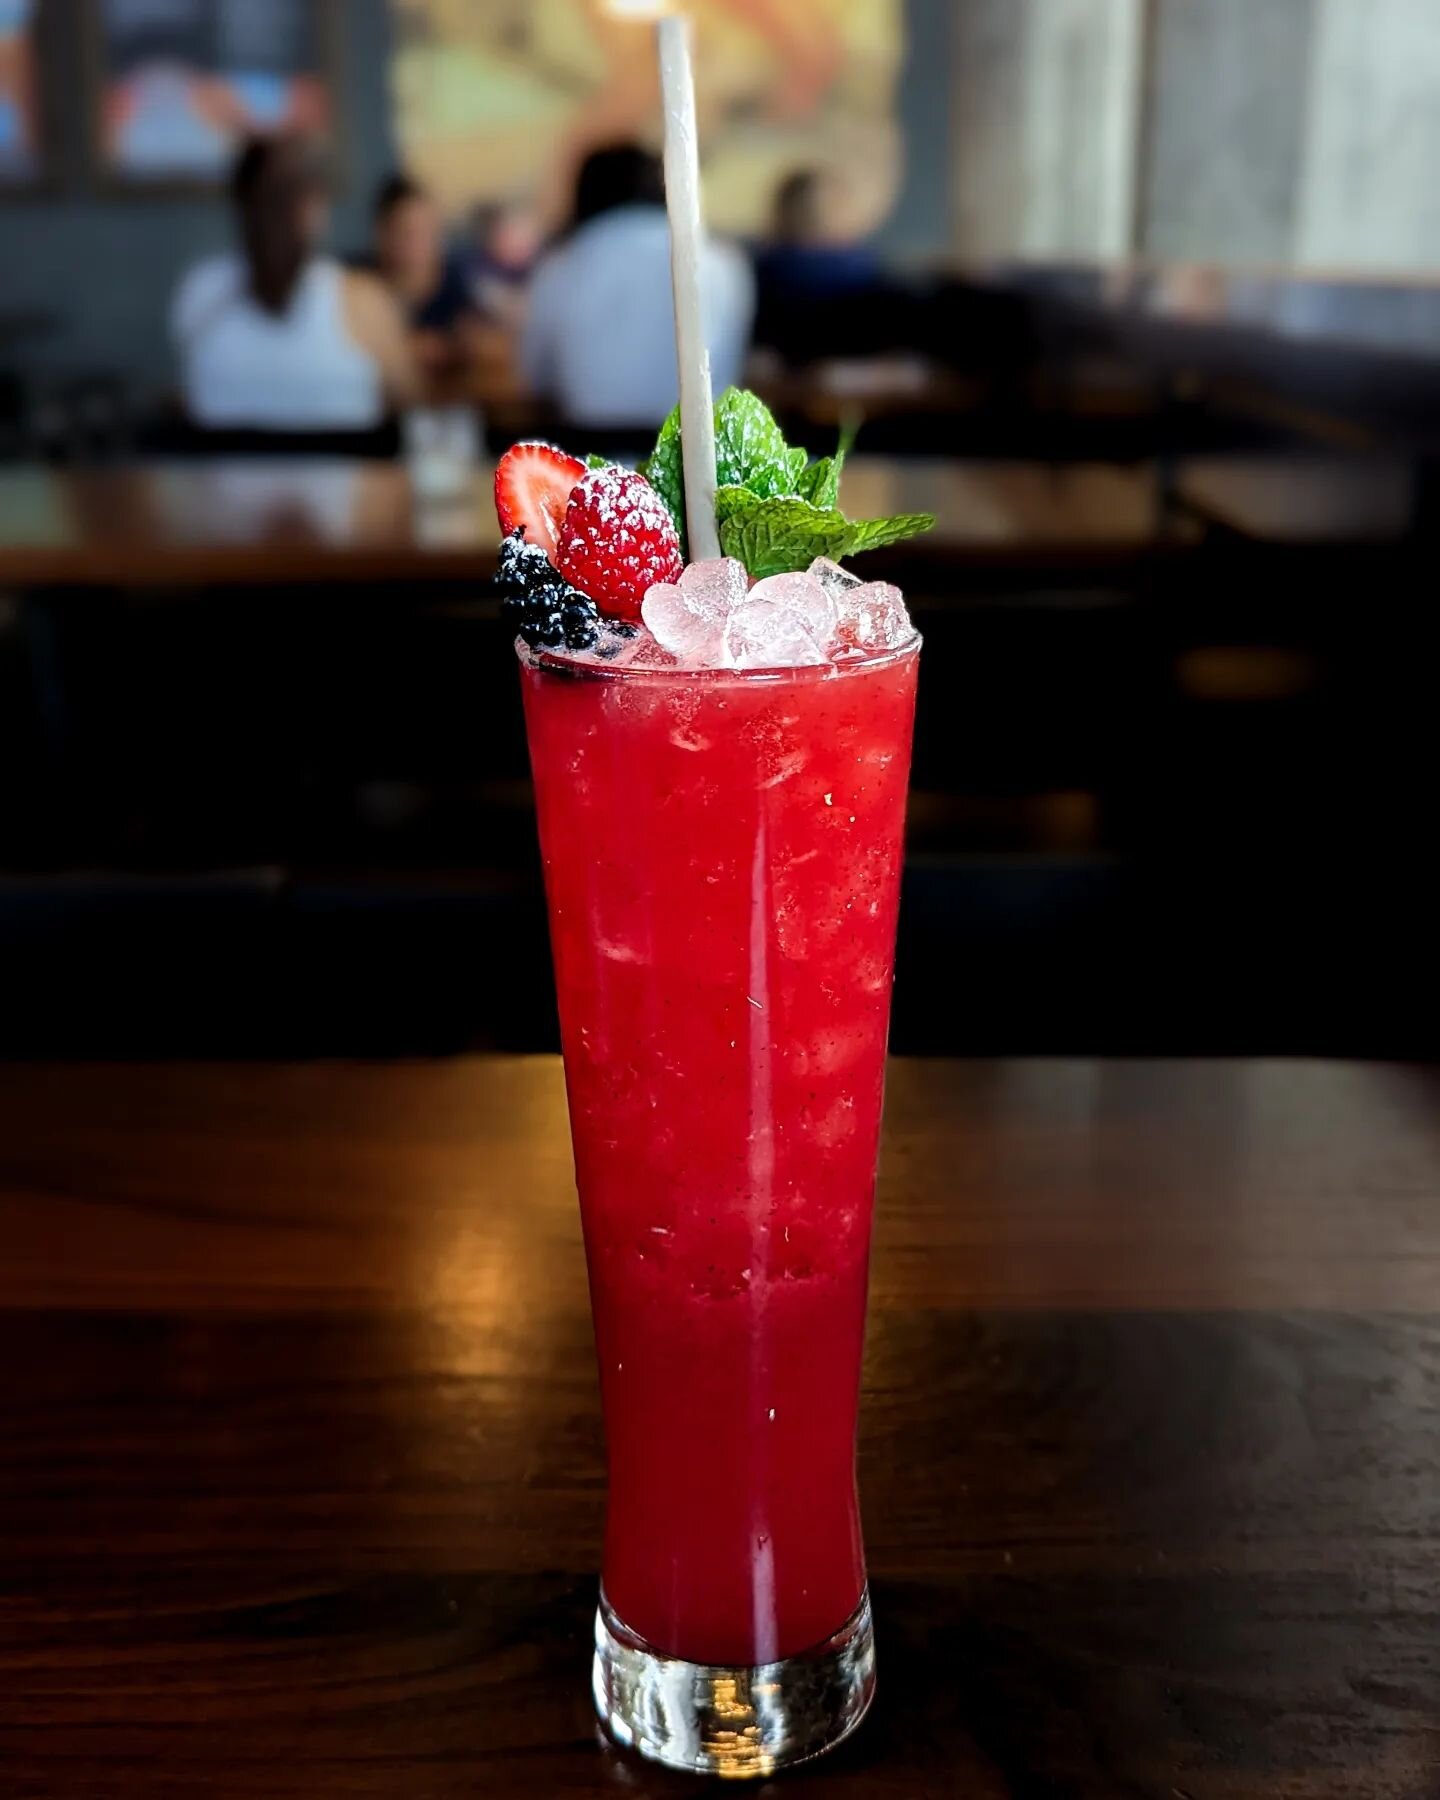 Making cocktails not only taste delicious but look delicious as well.

Whiskey Berry Jublee🍓 @bitterandtwisted_az 
Bourbon -3 berry liqueur - blackberry raspberry strawberry puree - @stabyl_beverage Lime - @bigmarbleorganics ginger beer